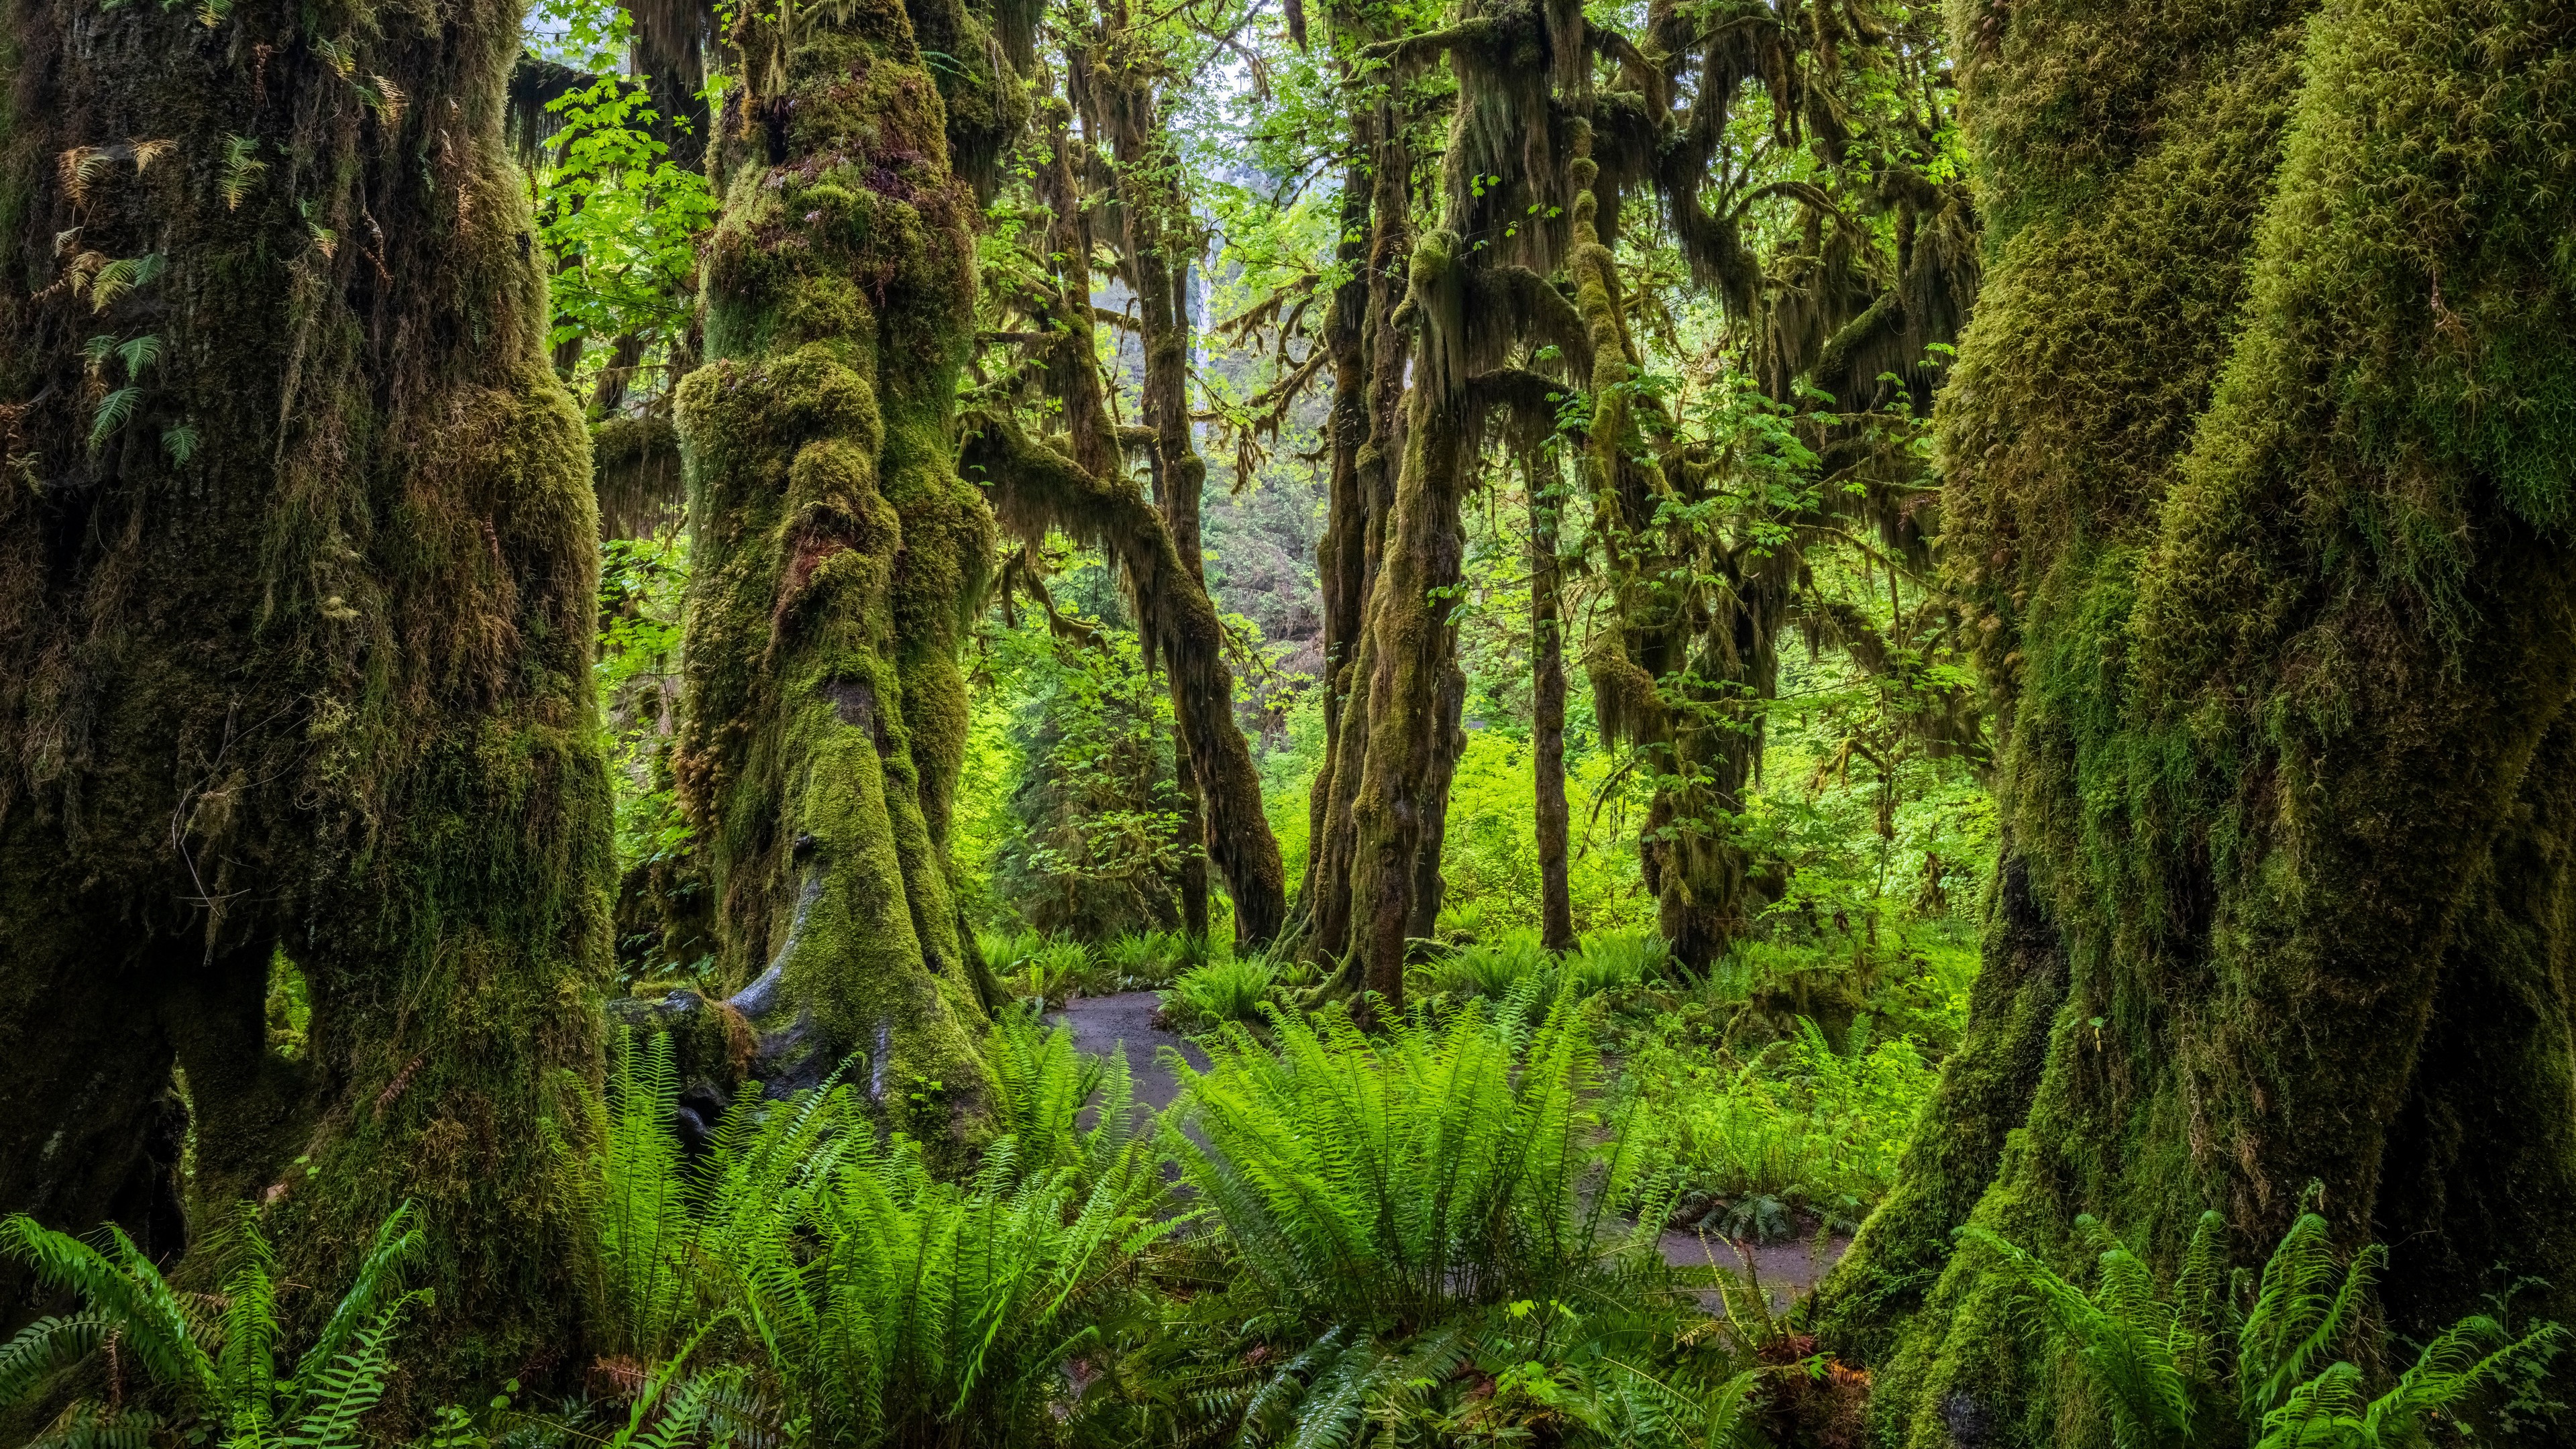 General 3840x2160 Olympic National Park USA Washington (state) nature forest trees moss plants